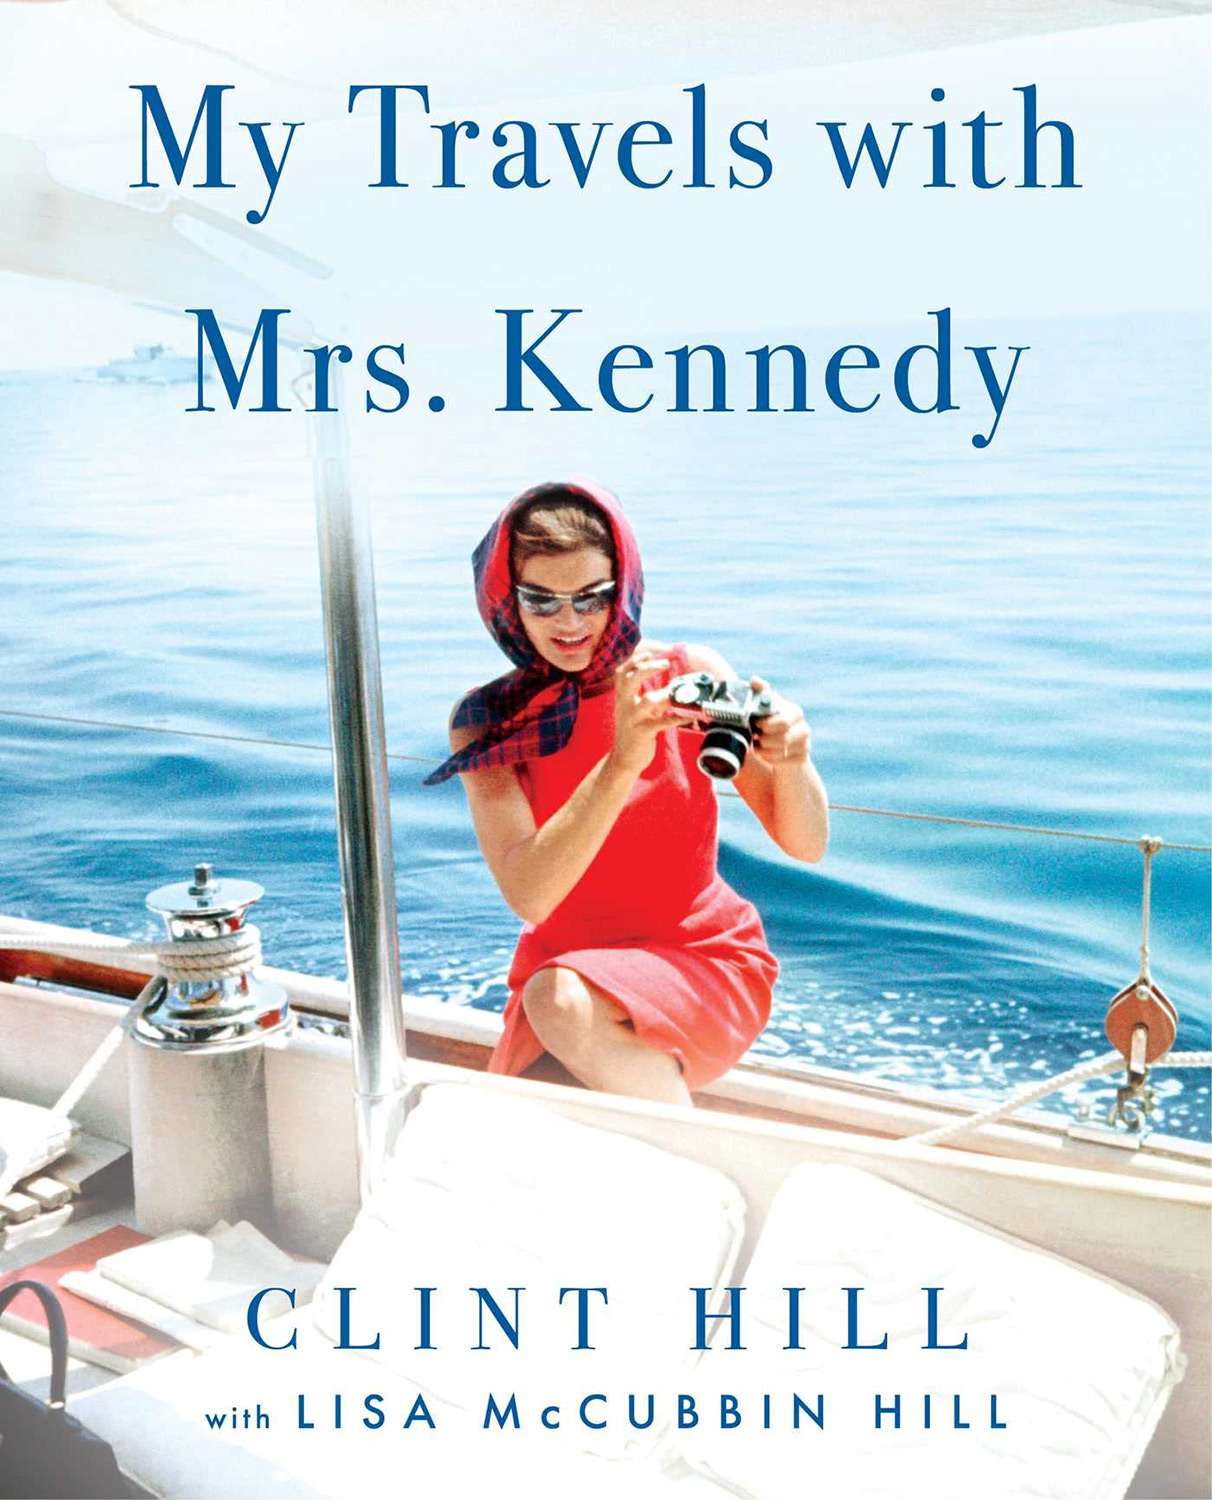 Clint Hill Coming Out With New Book Image?url=https%3A%2F%2Fstatic.onecms.io%2Fwp-content%2Fuploads%2Fsites%2F20%2F2022%2F04%2F06%2Fclint-hill-jackie-kennedy-3